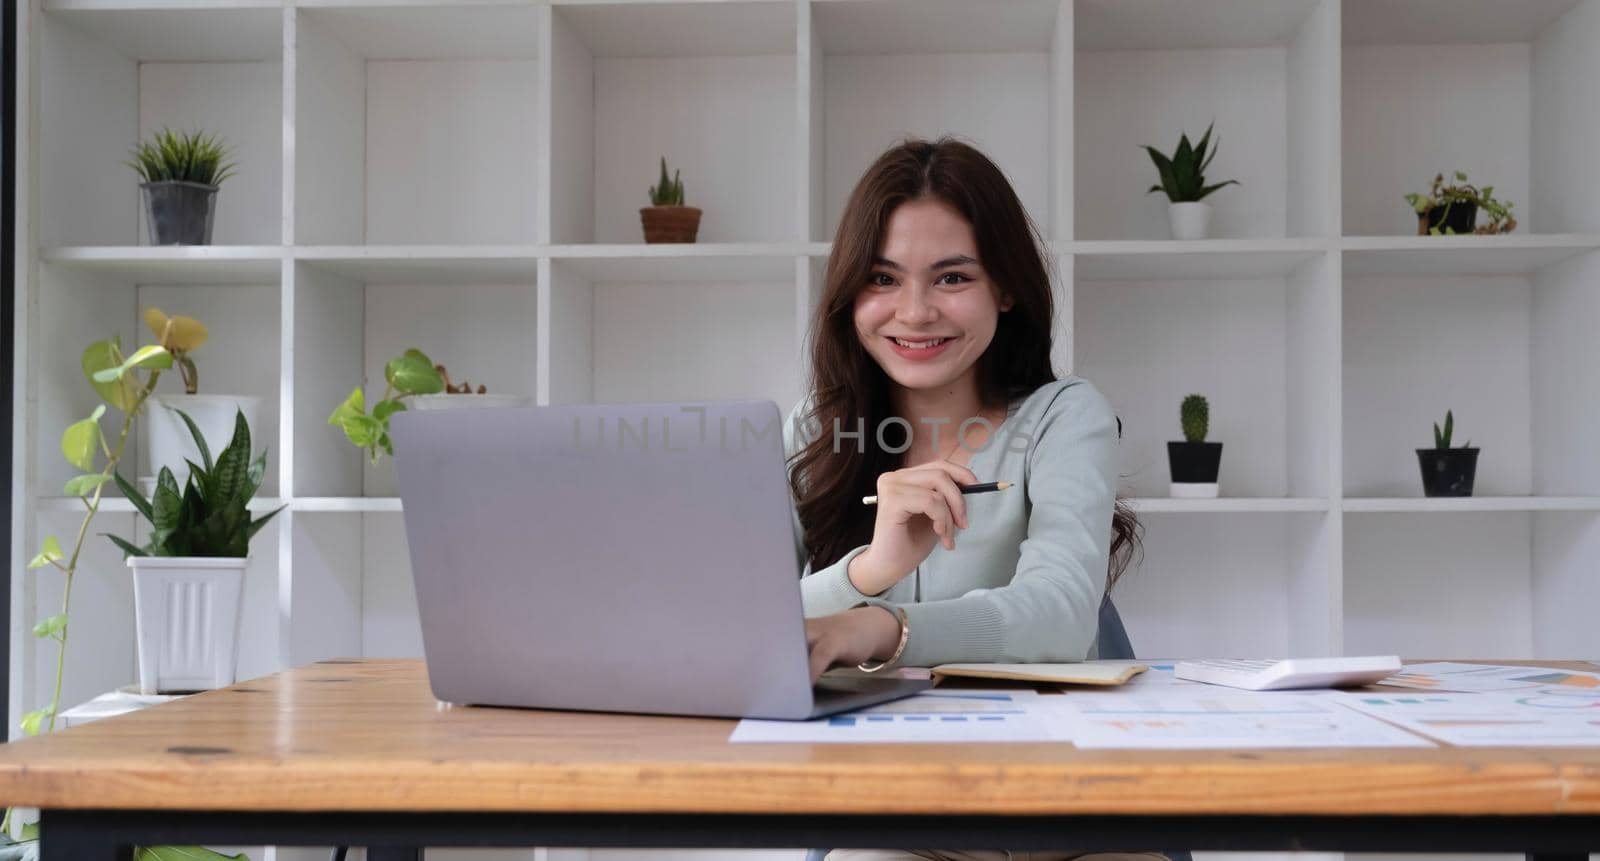 Portrait of an Asian young business Female working on a laptop computer in her workstation.Business people employee freelance online report marketing e-commerce telemarketing concept. by wichayada